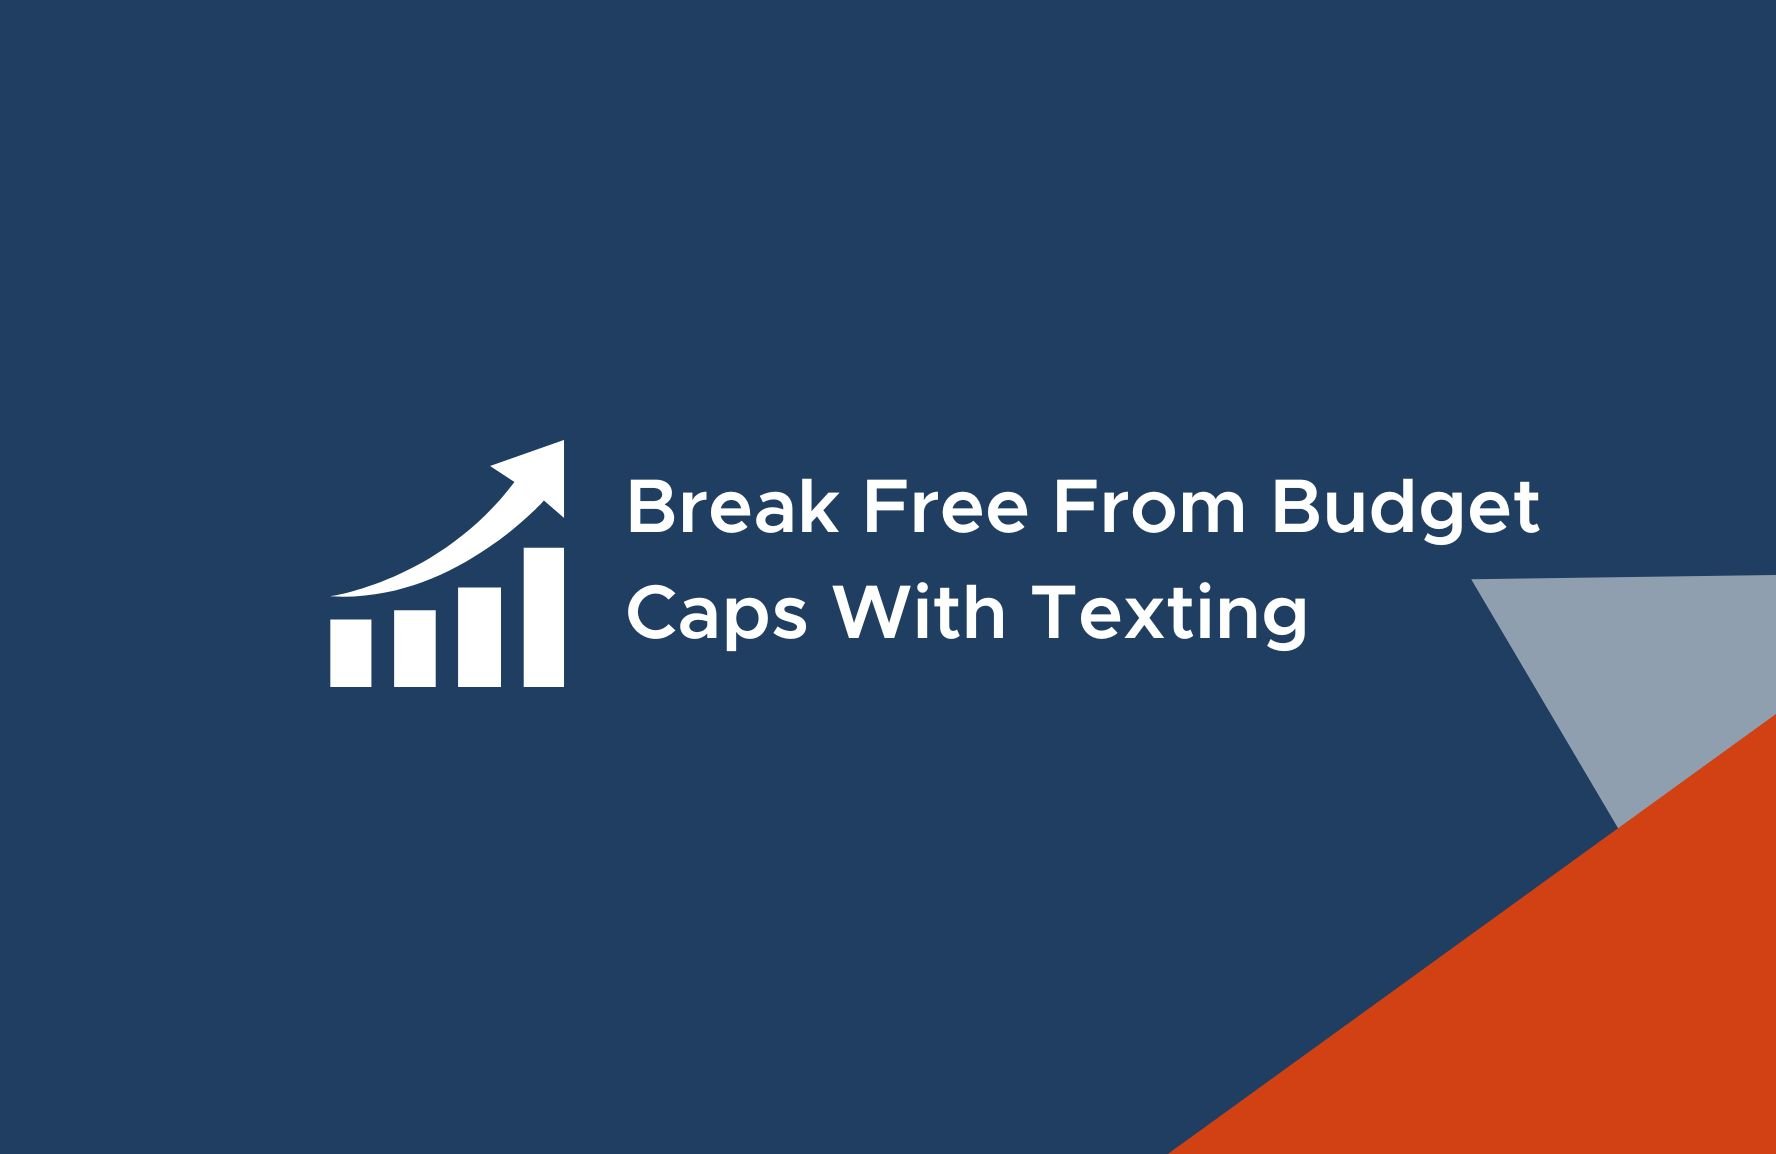 rethink budgets with text marketing and fundraising for nonprofits